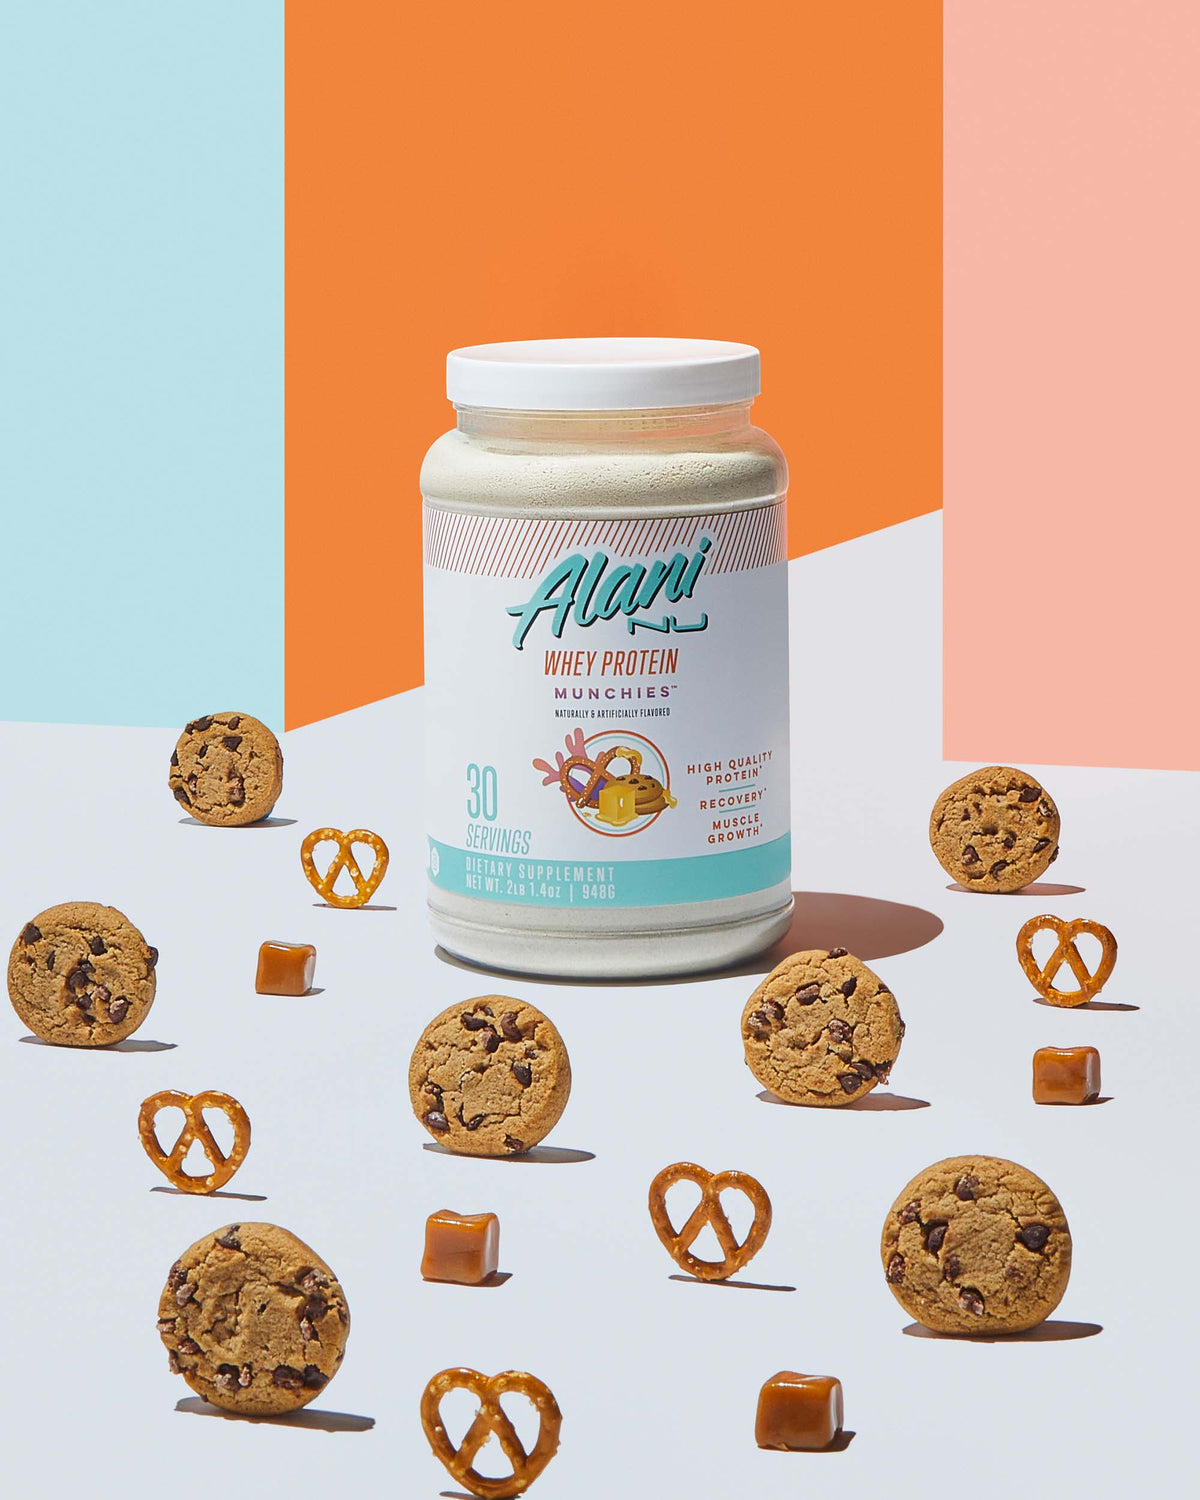 Whey Protein in Munchies flavor surrounded by cookies and pretzels.